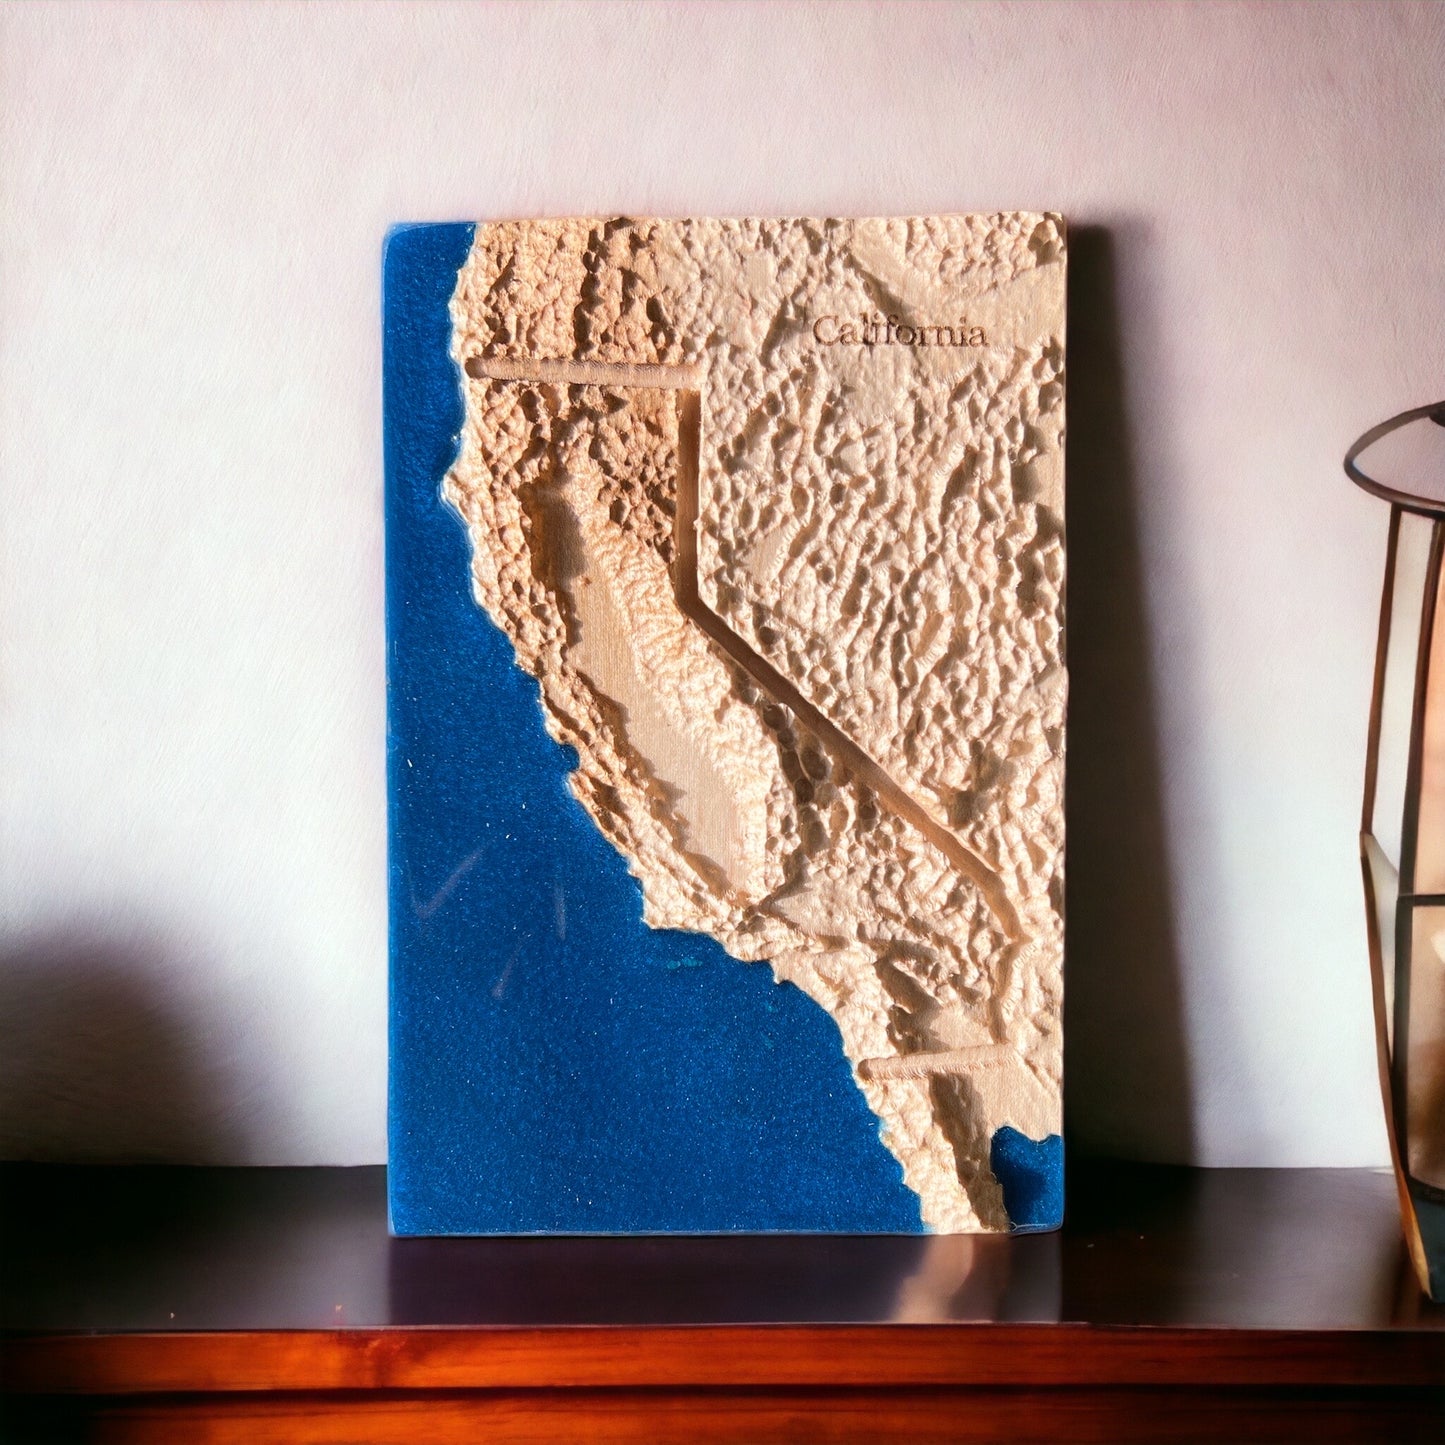 California 3D Relief Map | California Wood Epoxy Art | Los Angeles | San Francisco | Aerial View Map | Gift for Husband | Travel Gift